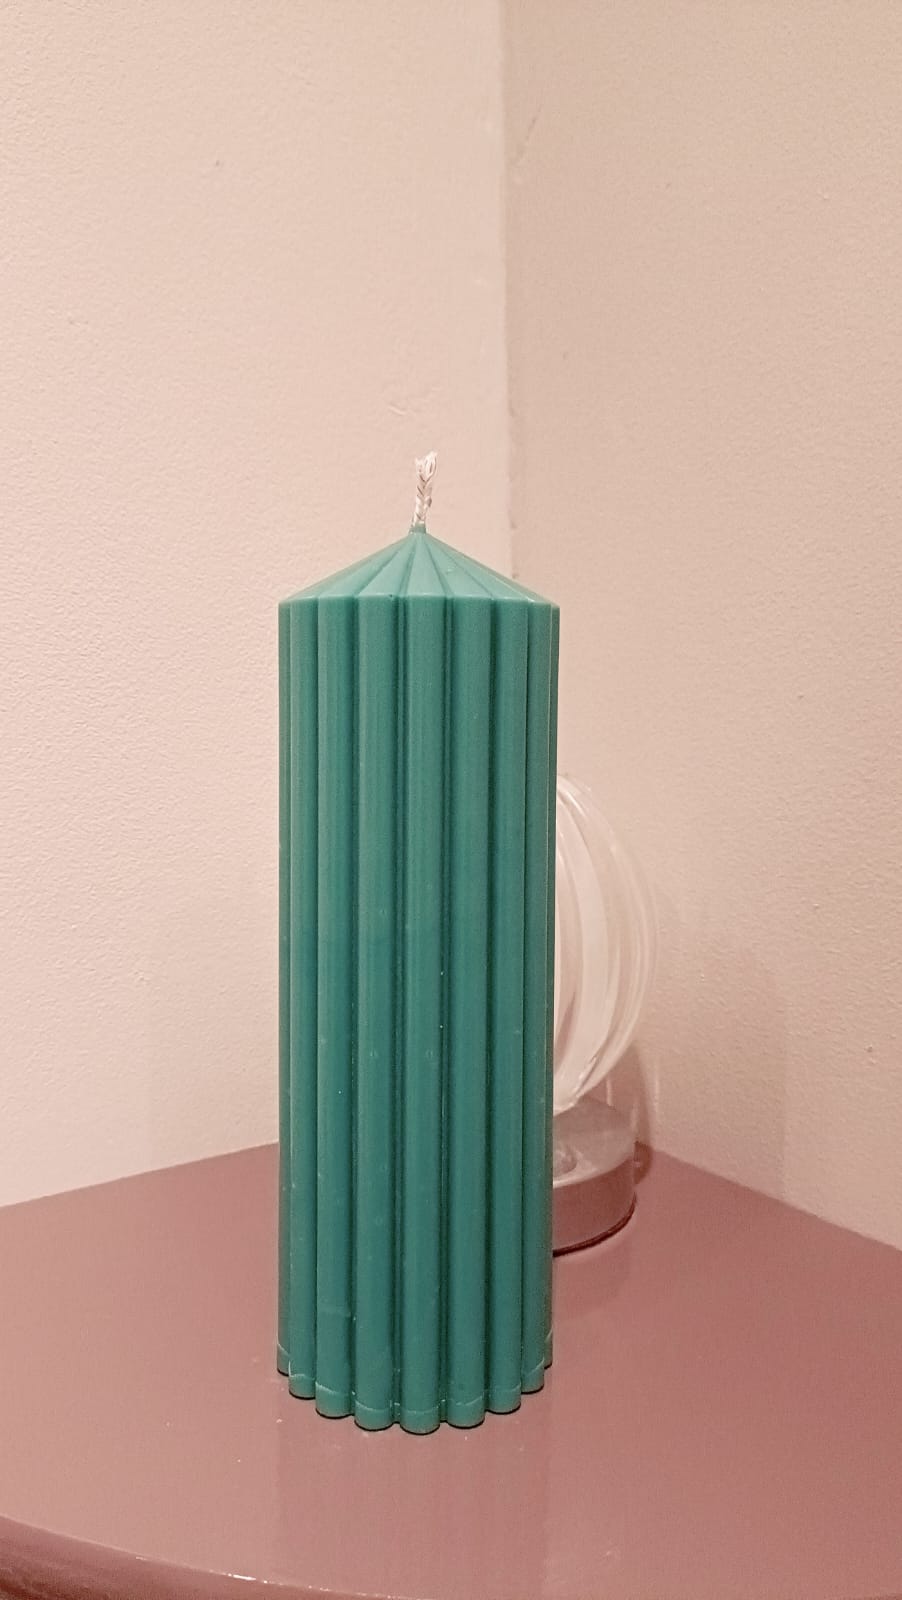 20cm Soy Wax Pillar Candles - Unscented (Various Colours)